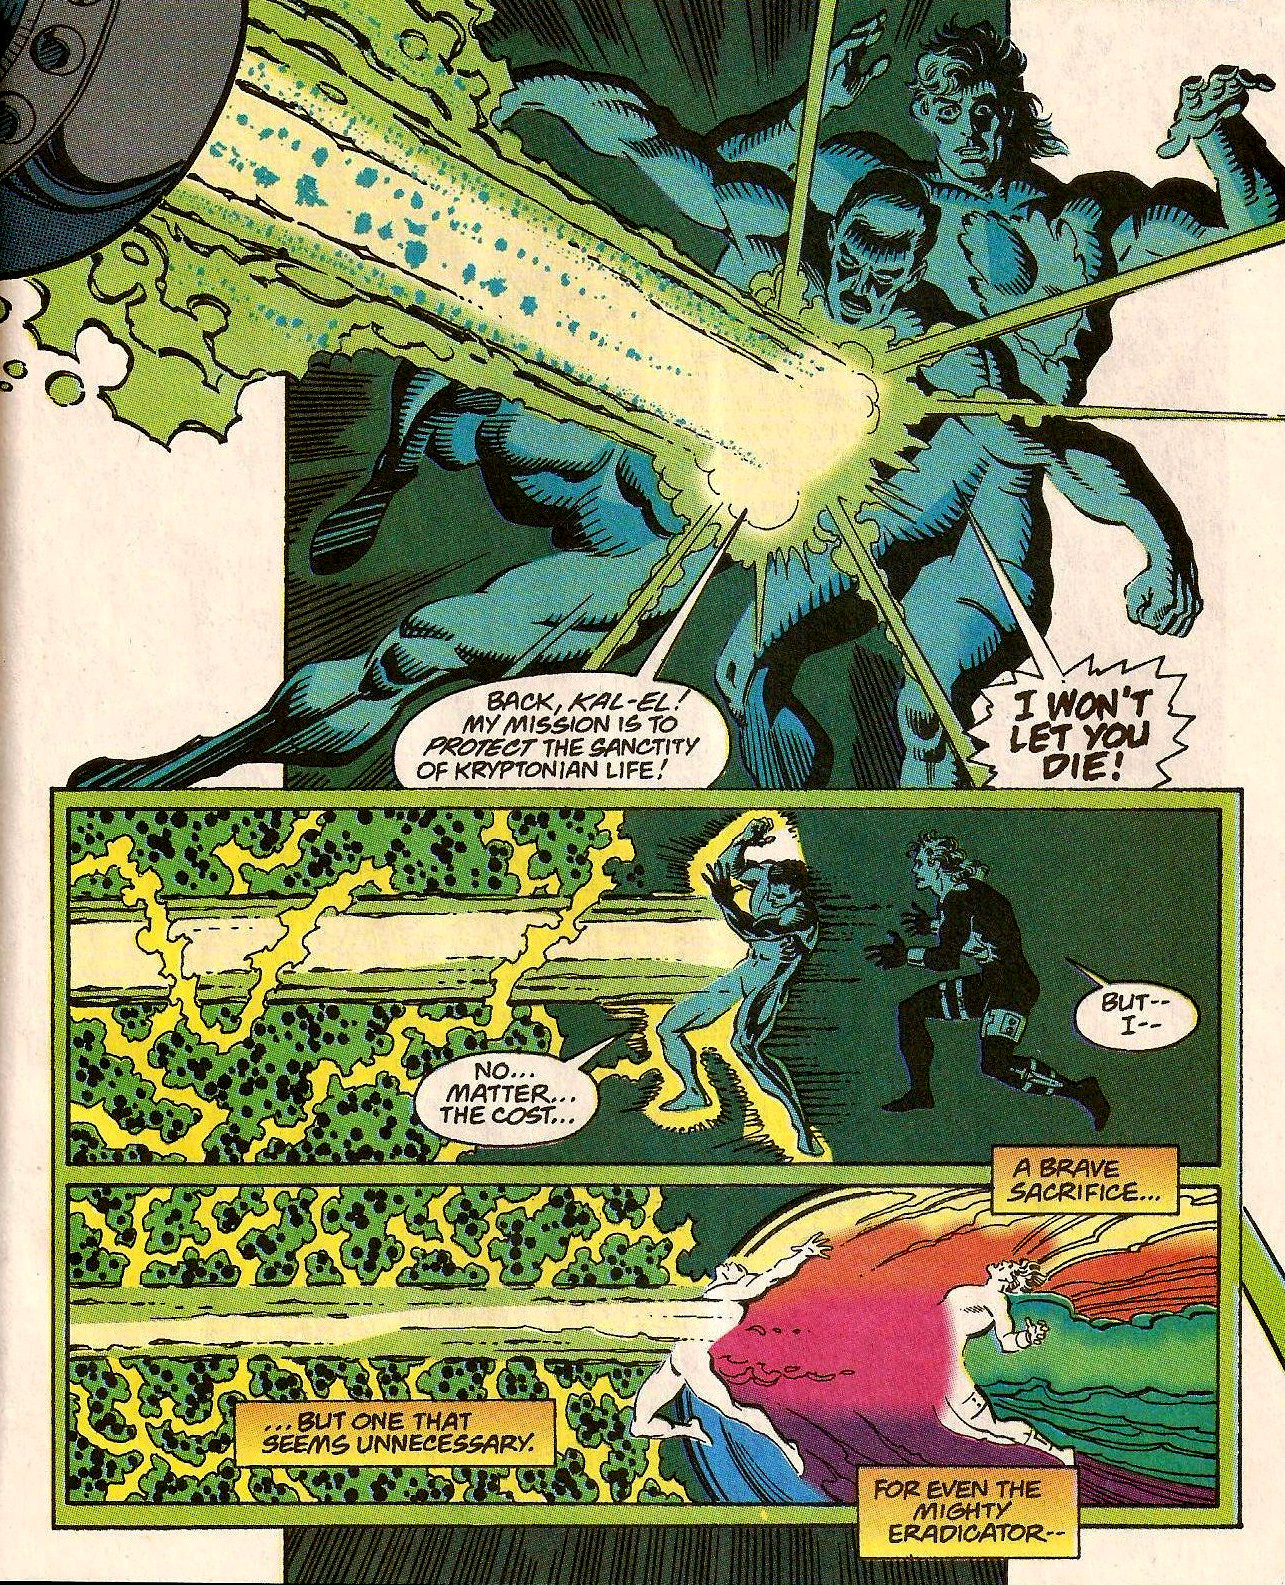 From Superman (Vol. 2) #82 (1993)